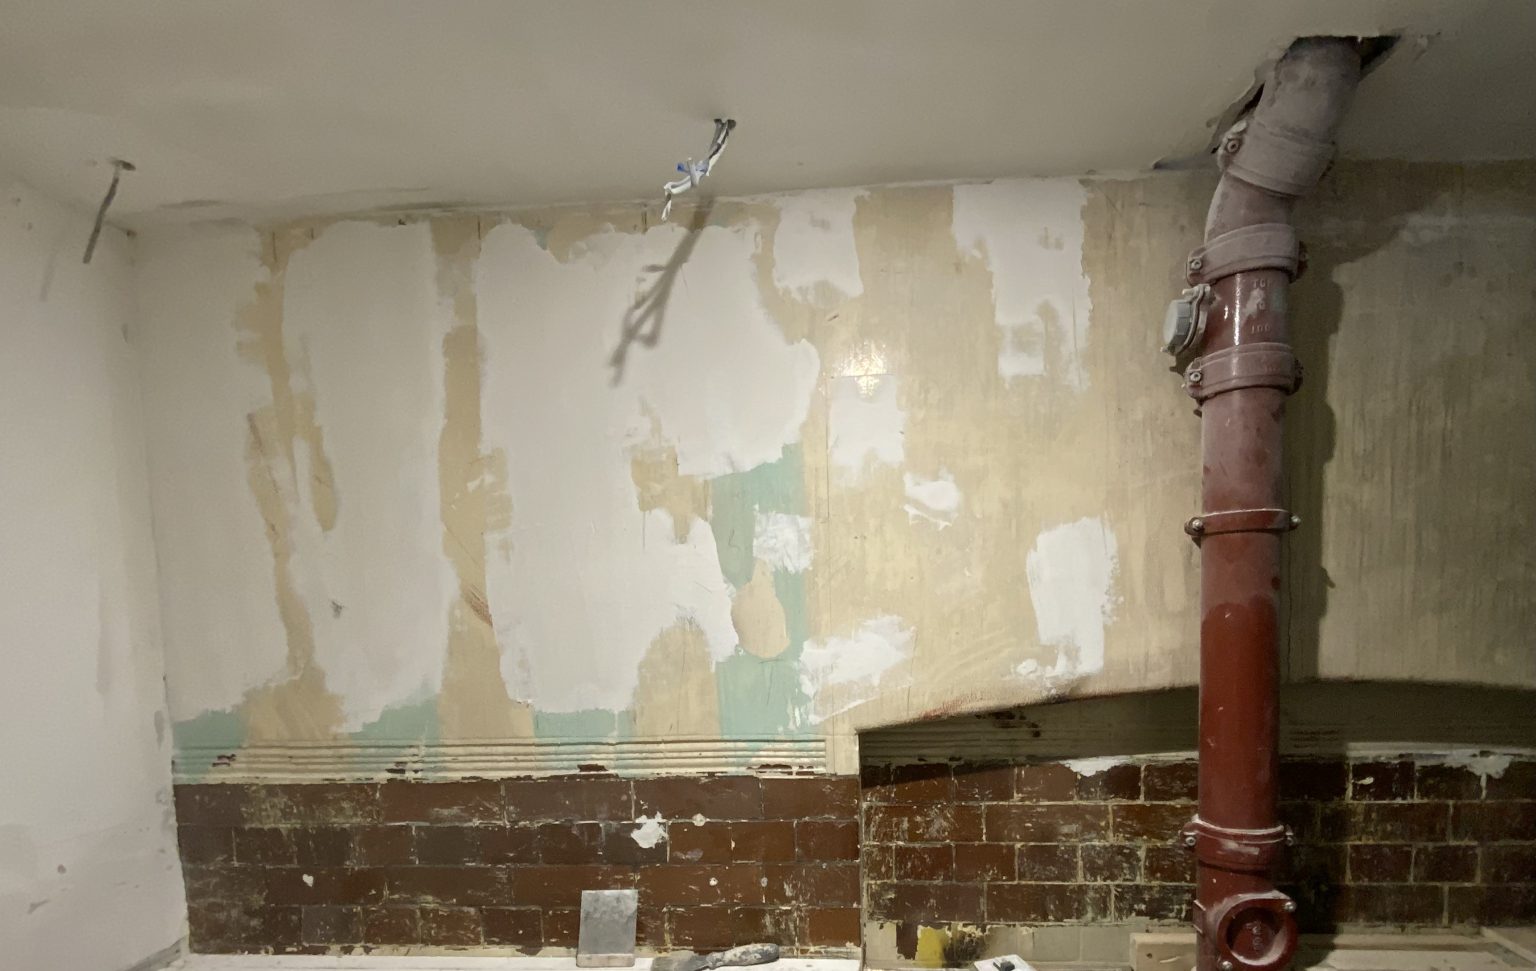 Exposed victorian features in new bathroom